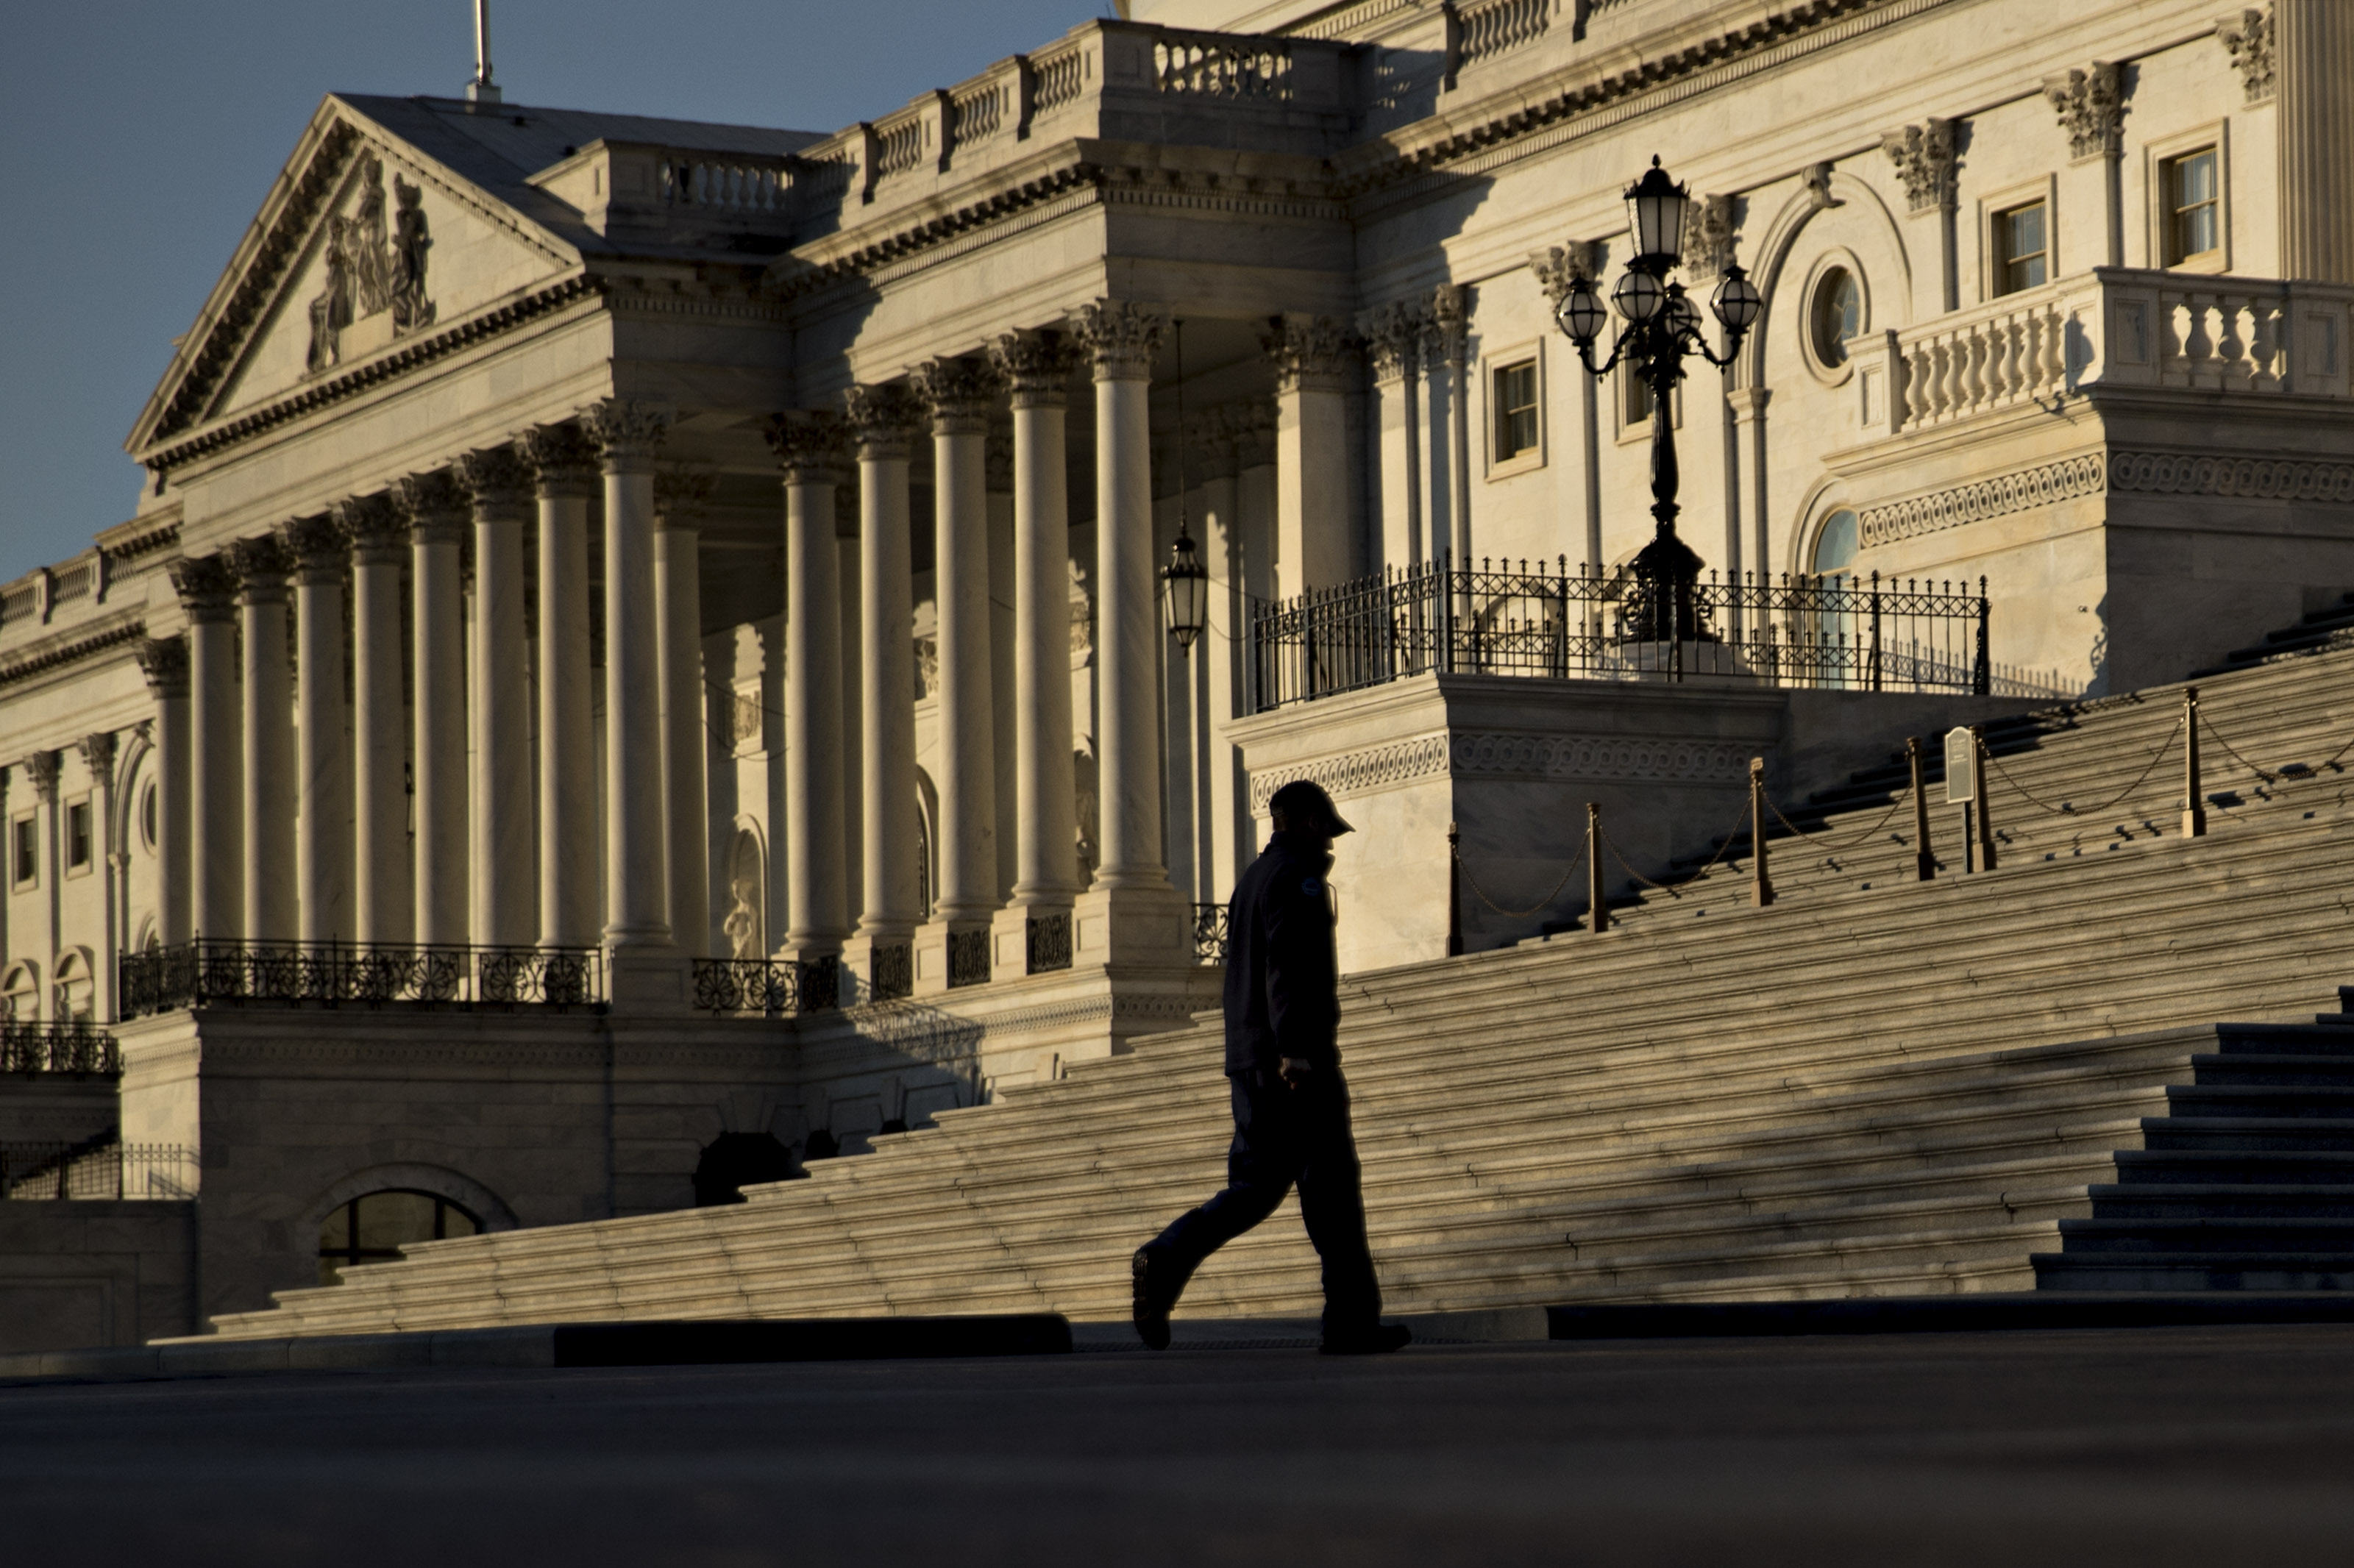 A man walks near the U.S. Capitol in Washington, D.C., U.S., on Tuesday, Dec. 19, 2017. Congressional Republicans kicked off the final leg of their six-week legislative sprint to overhaul the U.S. tax code and deliver a major policy victory for President Donald Trump before years end. The House is scheduled to vote Tuesday on the tax bill and Senate leaders intend to bring the measure up as soon as they get it.